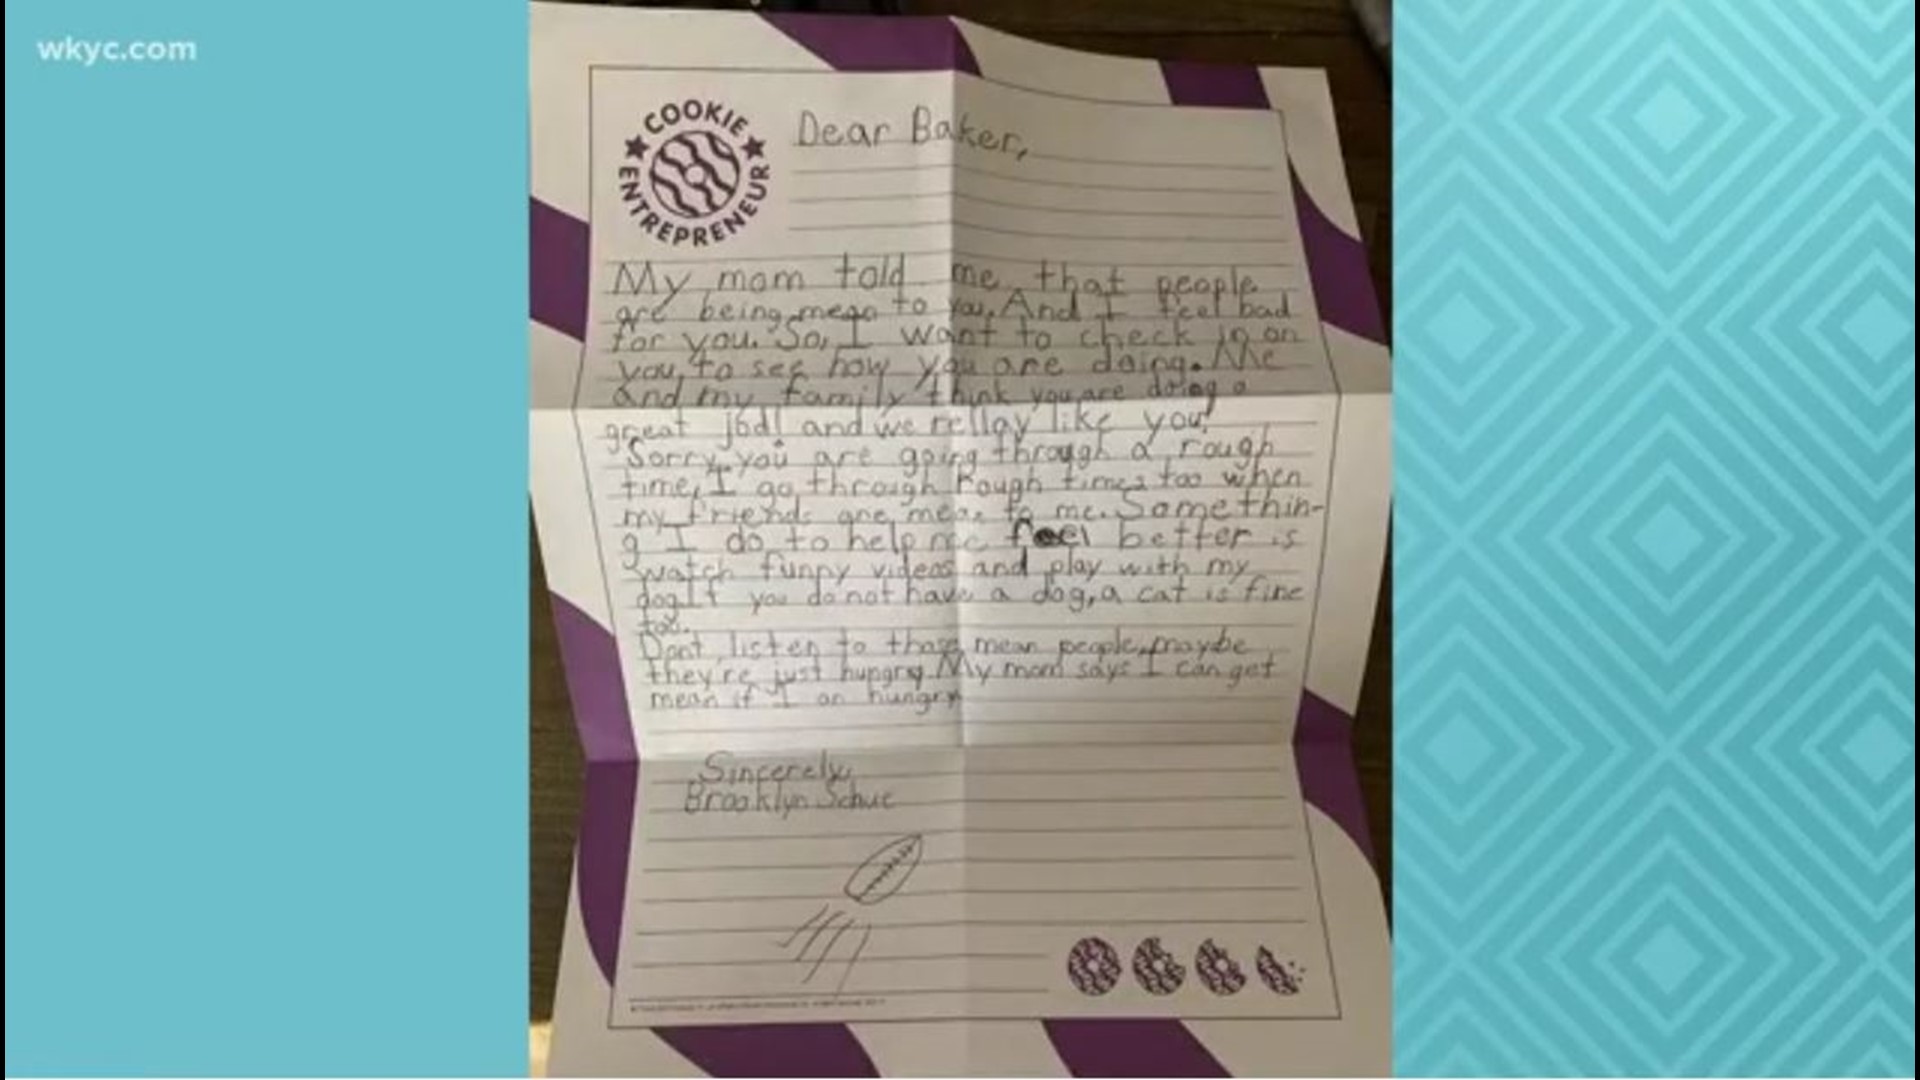 Third-grade student Brooklyn Schue of Lorain shared a special letter with Baker Mayfield to check in on him.